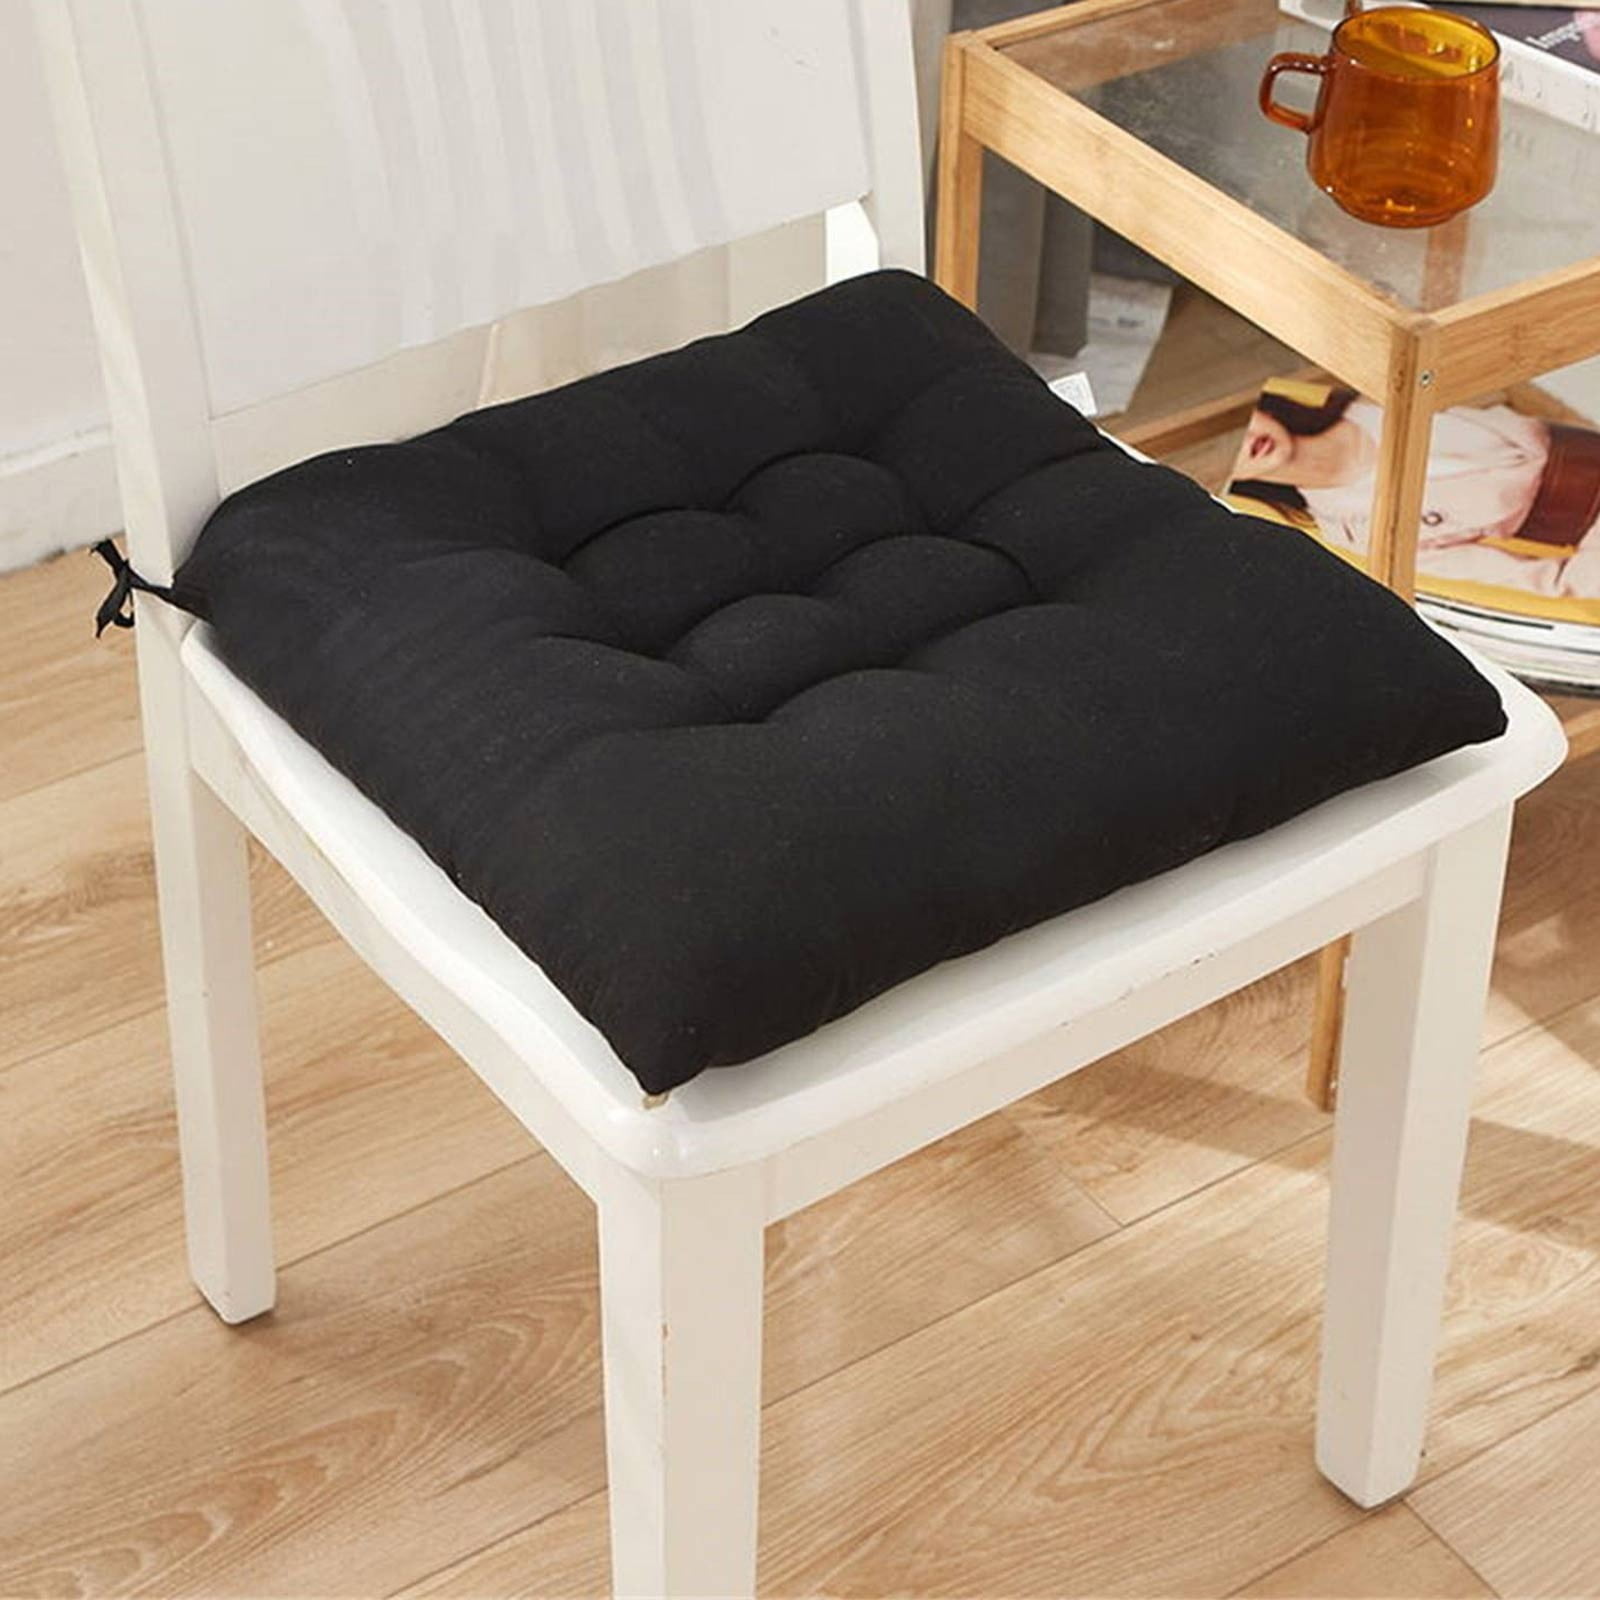 Yipto Large Floor Pillows Seating for Adults and Vietnam